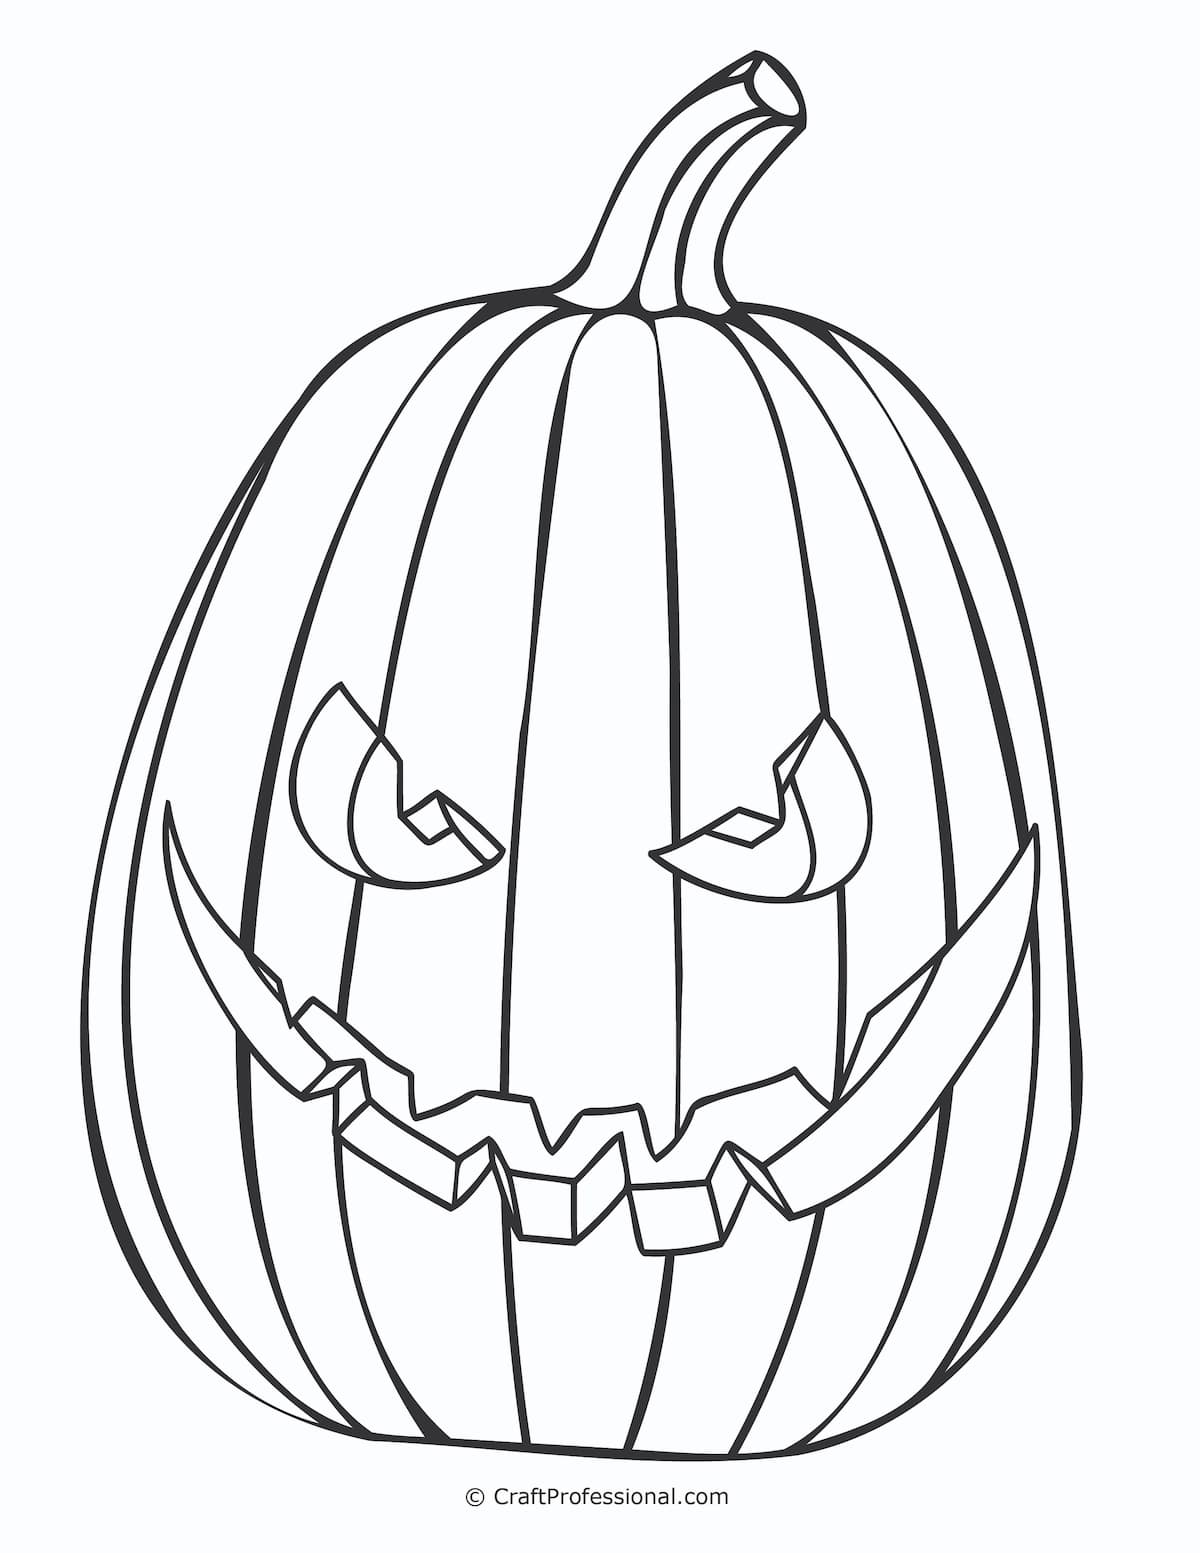 27 Pumpkin Coloring Pages Free Printables for Kids Adults to Color